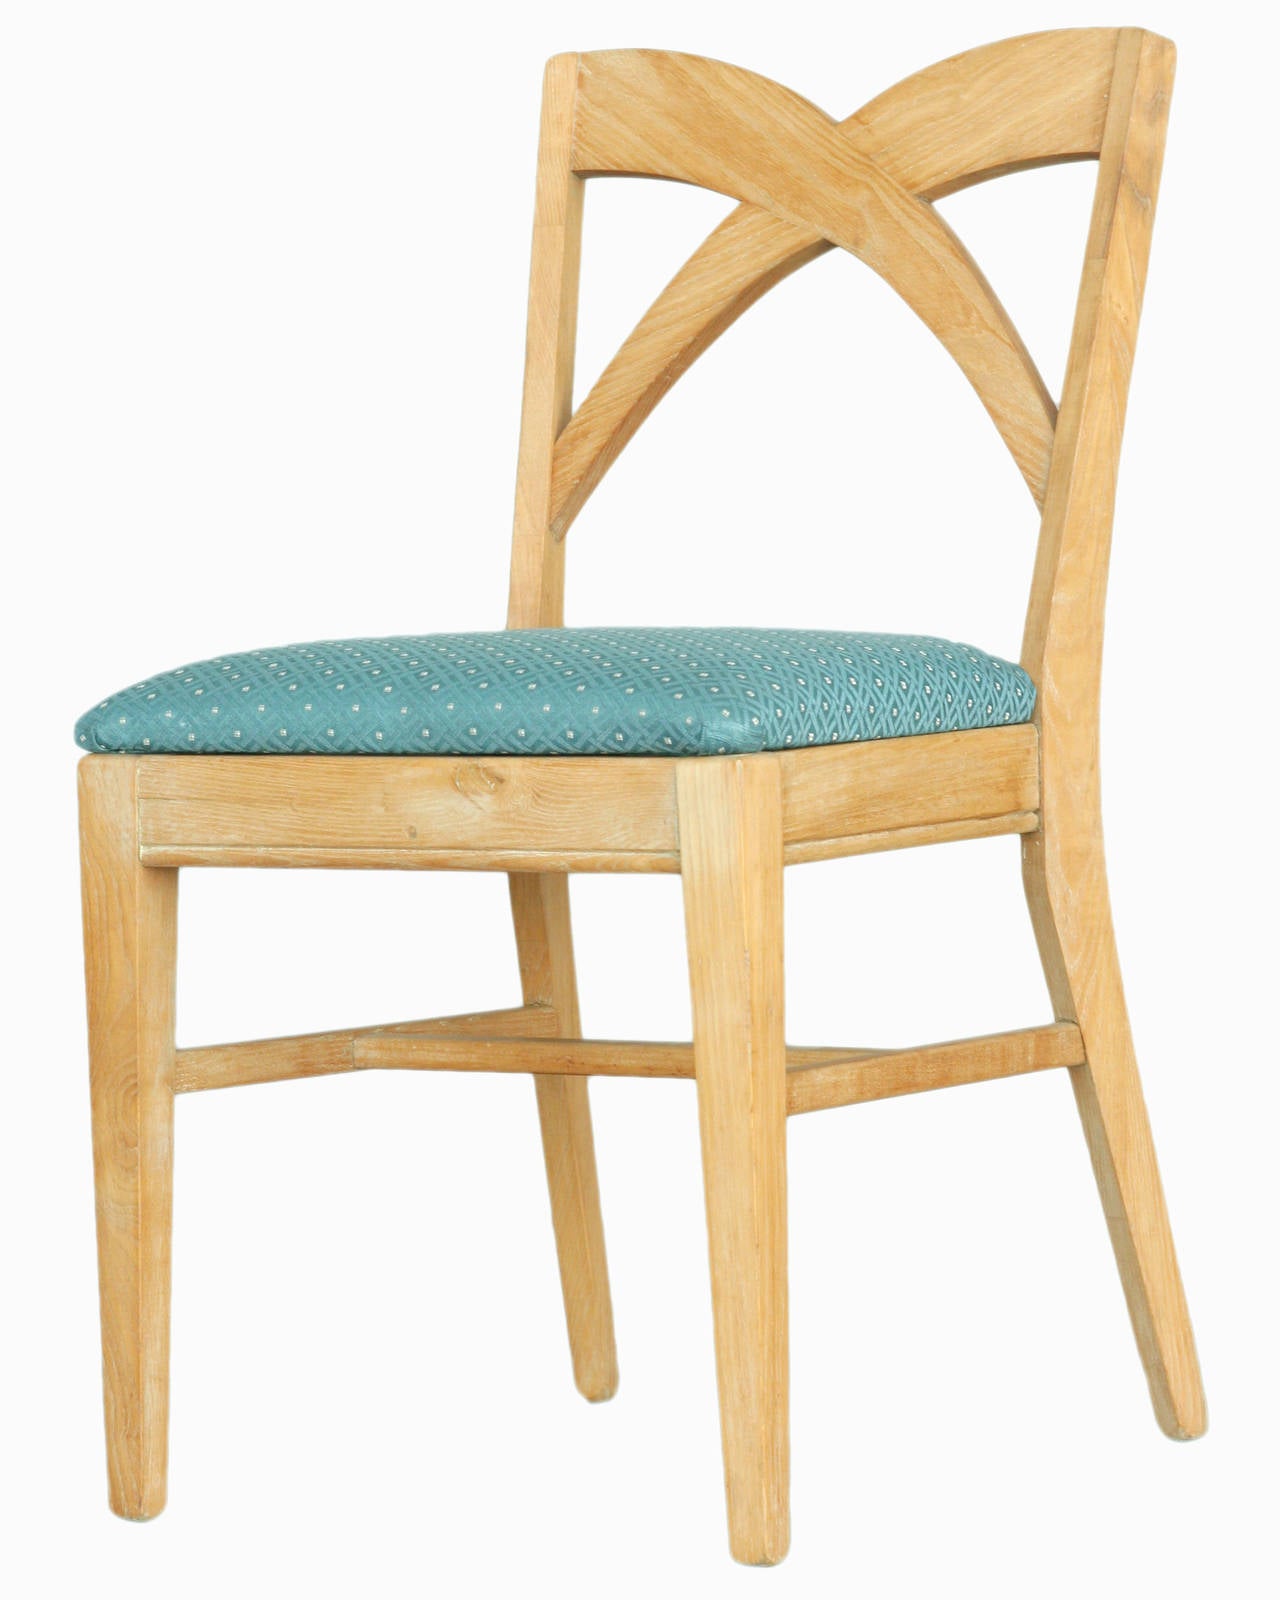 Set of dining chairs by Paul Frankl for the Brown Saltman group. The chairs are upholstered in high-quality blue cotton fabric with a unique crisscross 